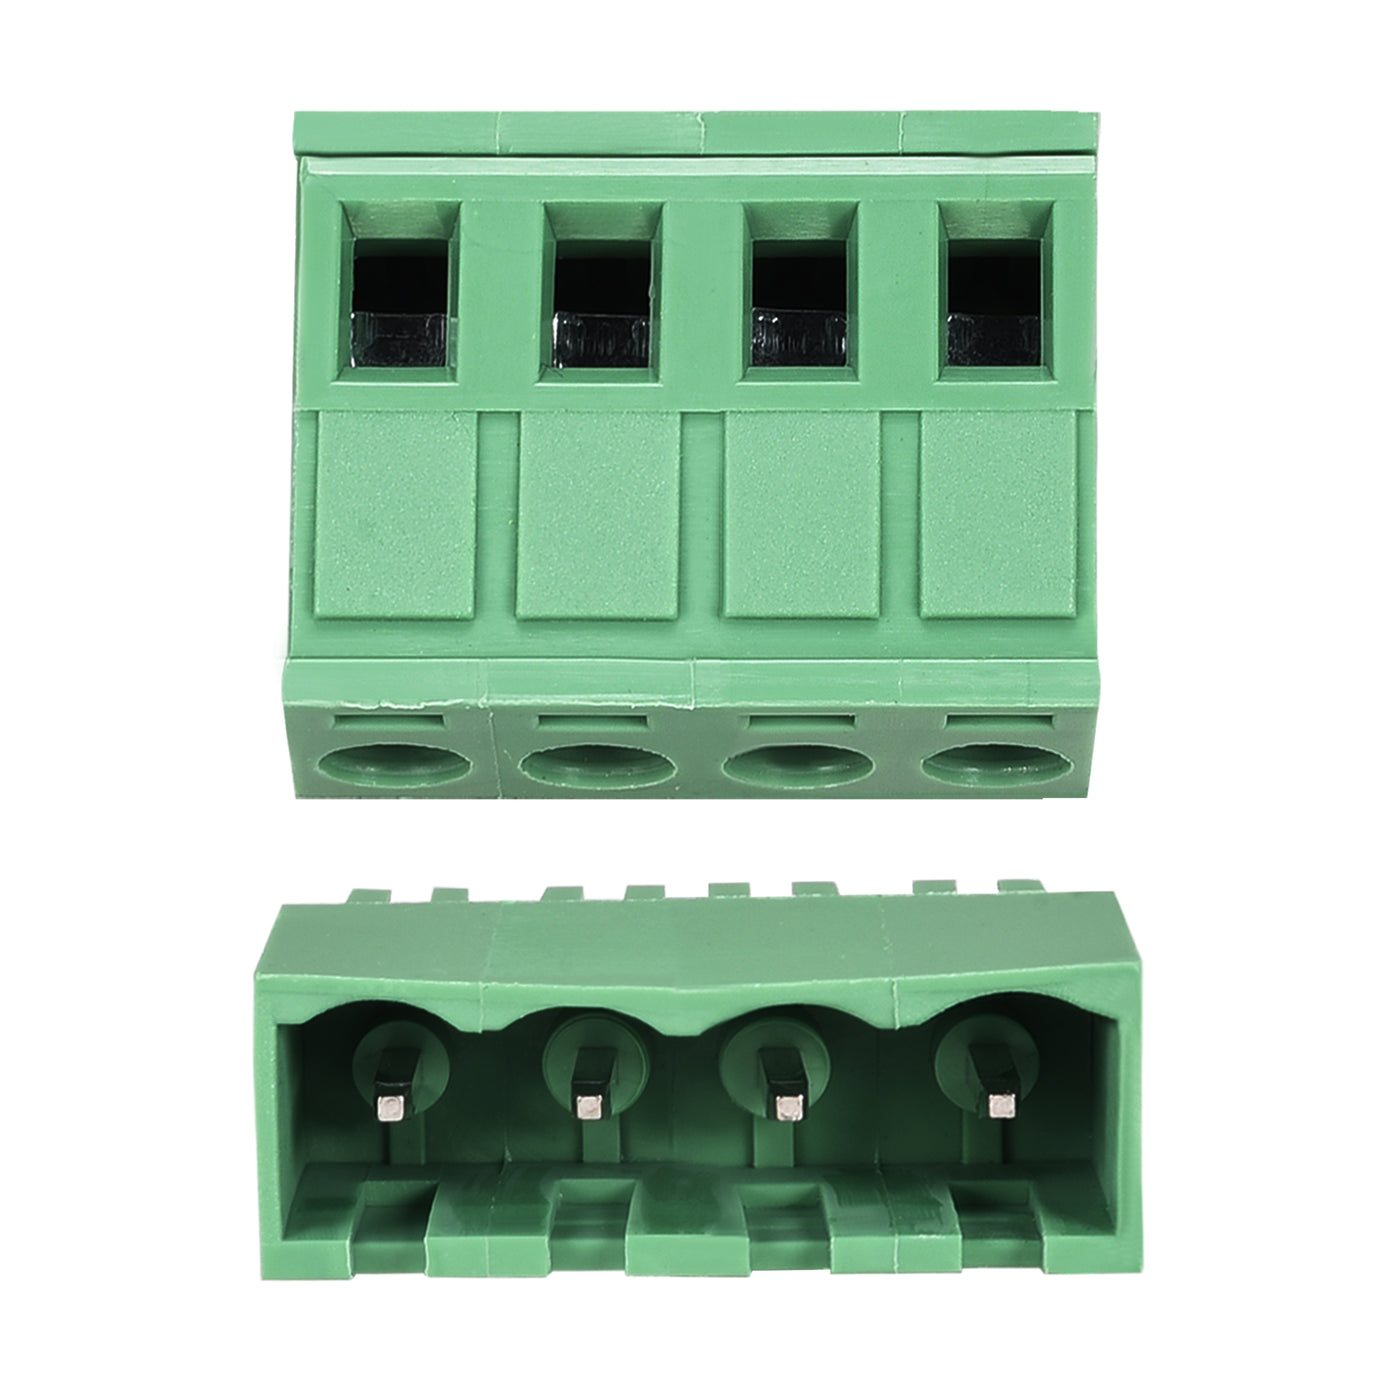 uxcell Uxcell 4 Pin 5.08mm Pitch Male Female PCB Screw Terminal Block 10 Sets